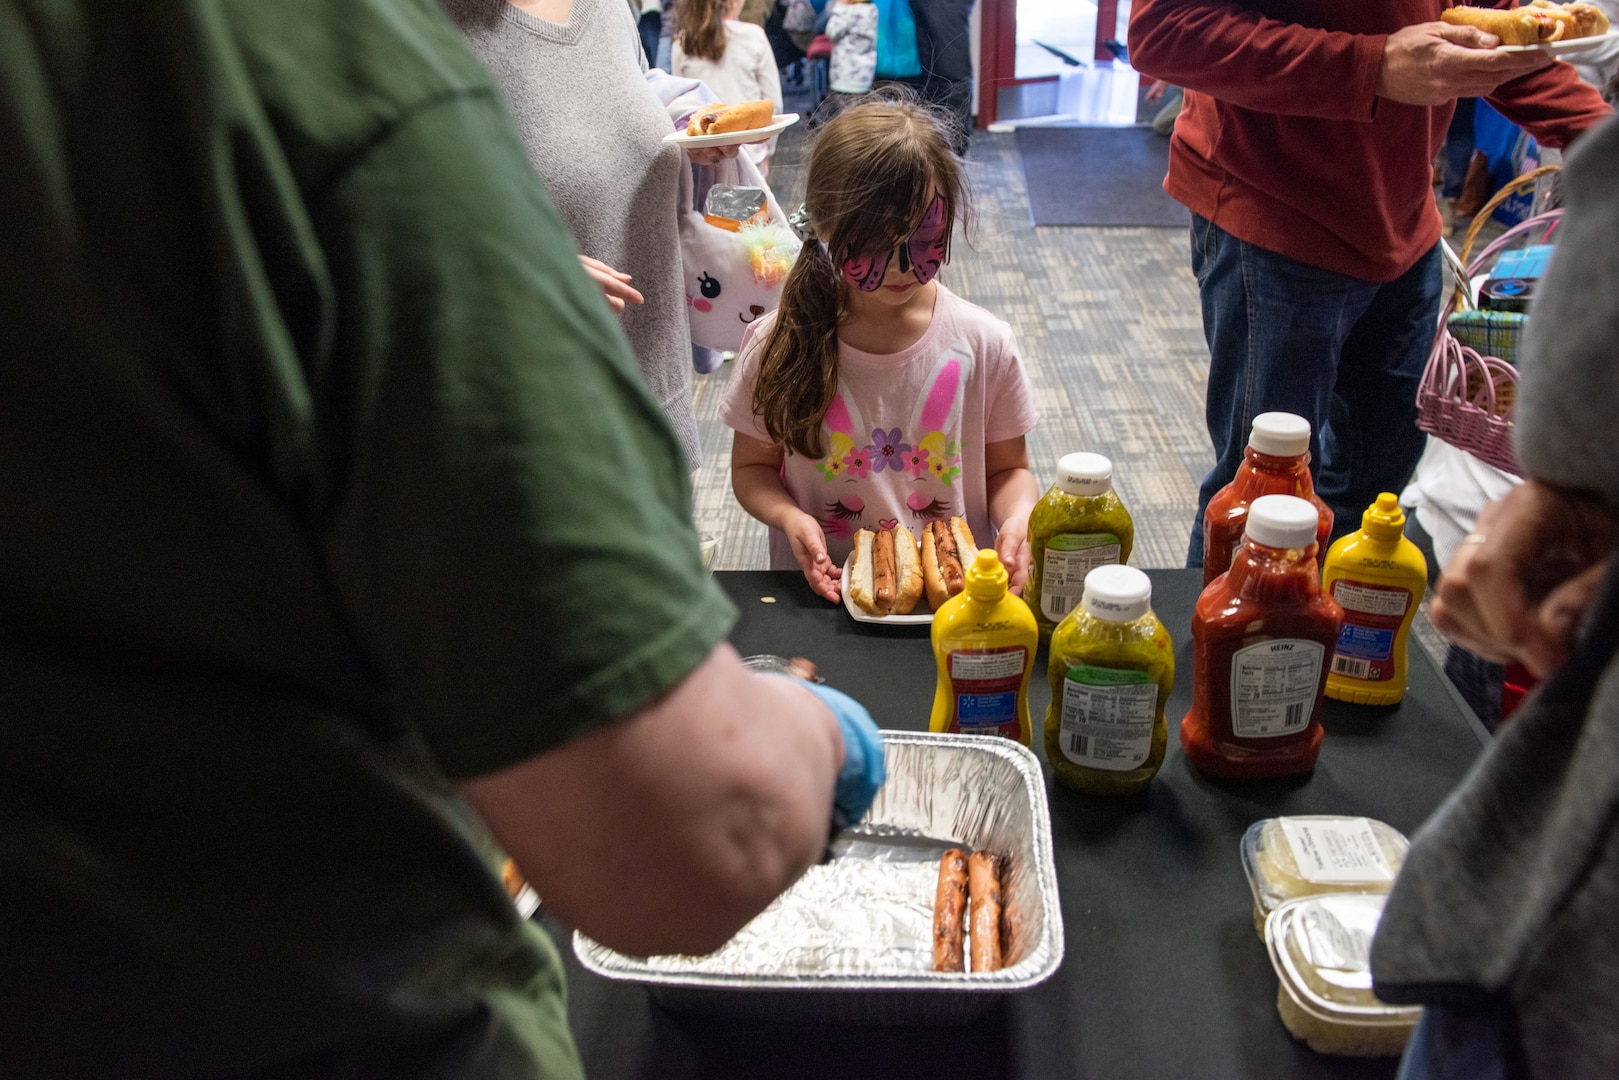 A girl with a butterfly painted on her face grabs two hot dogs from a table. She wears a pink shirt.